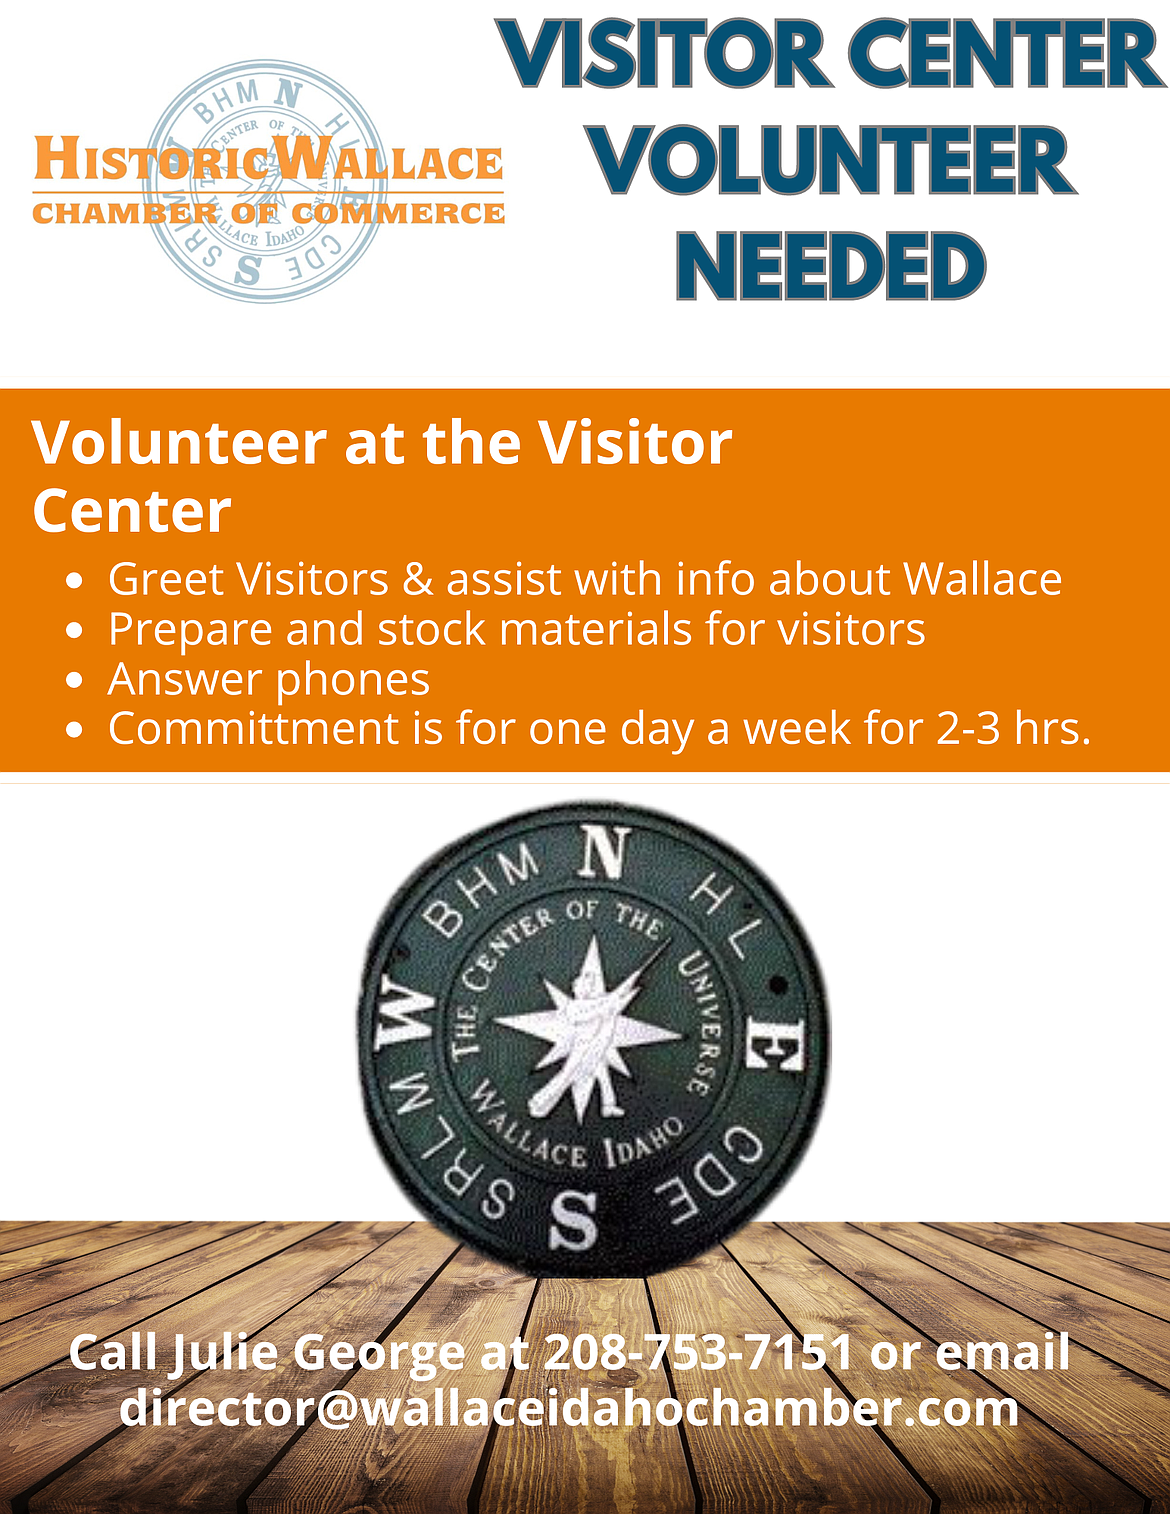 The Wallace Chamber of Commerce is looking for more volunteers to guide visitors on local landmarks.